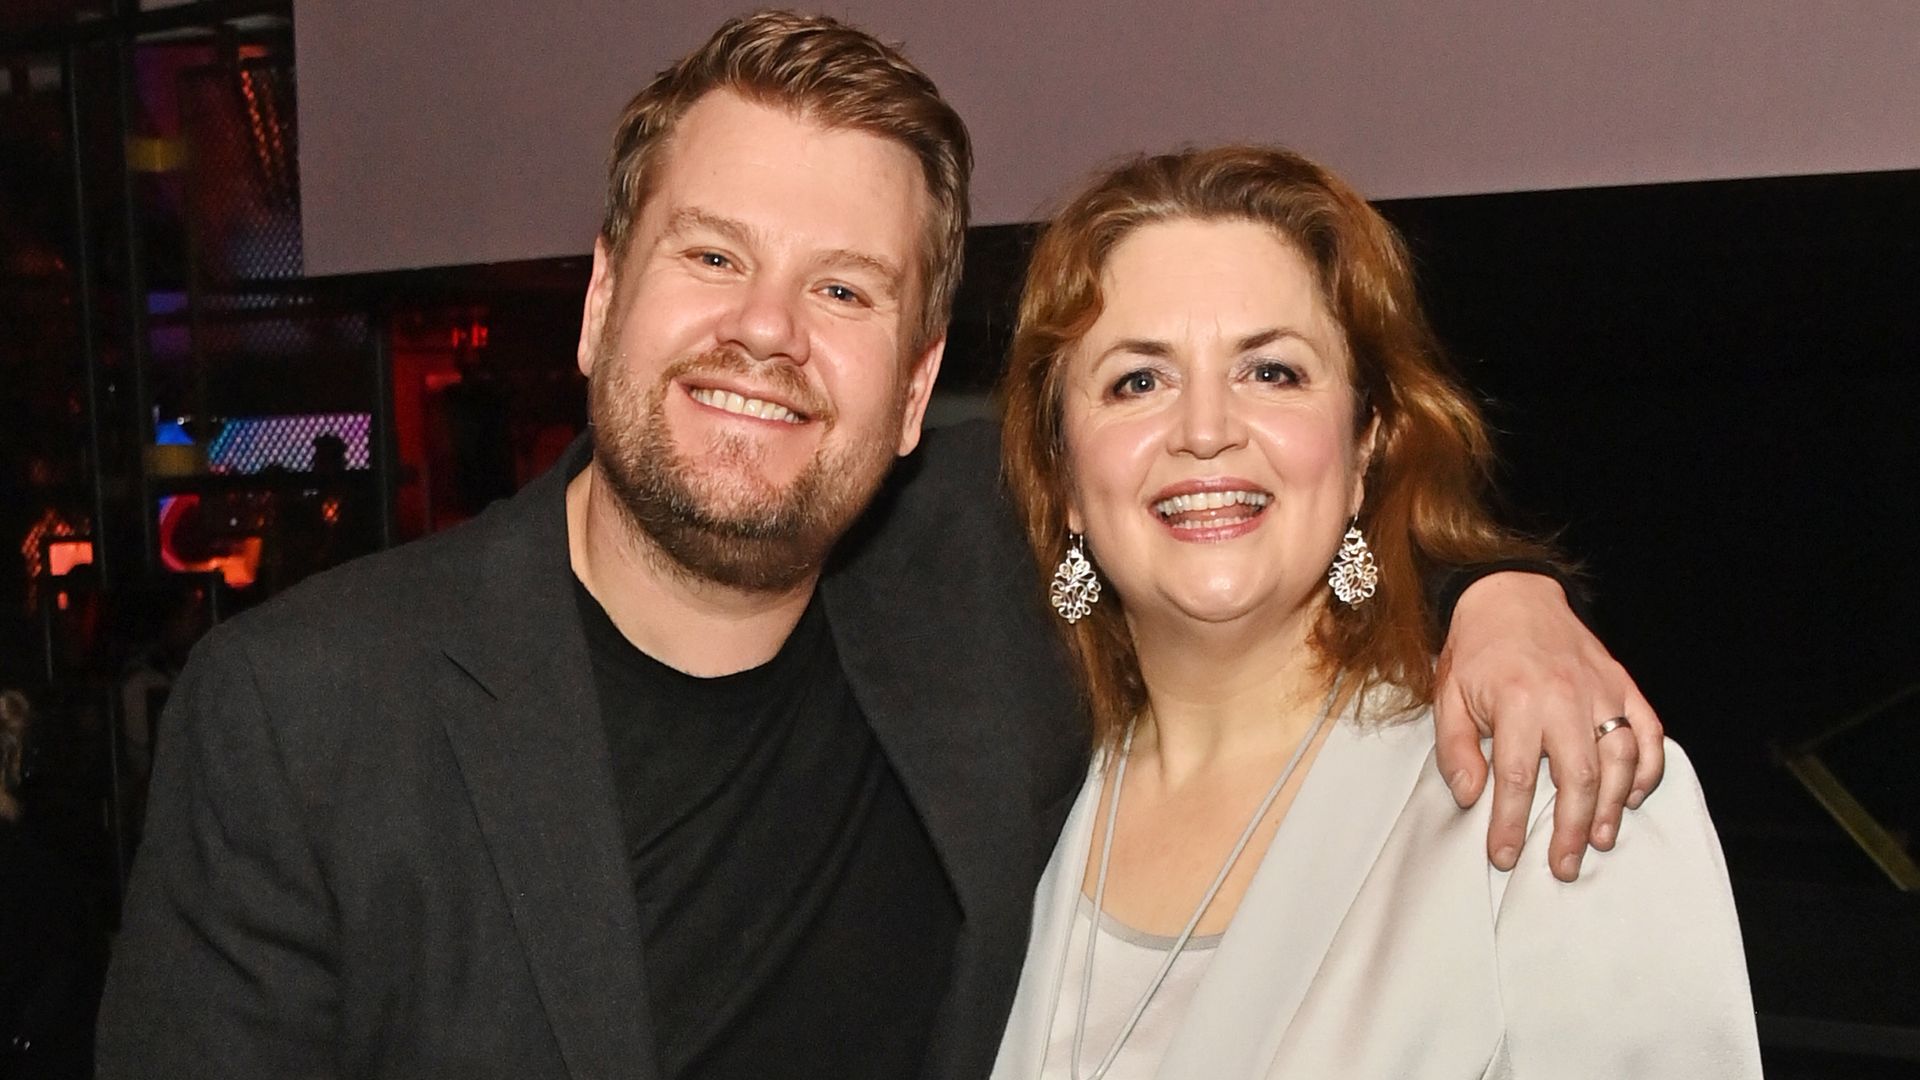 James Corden leads epic Gavin and Stacey reunion causing 'chaos' in West End theatre